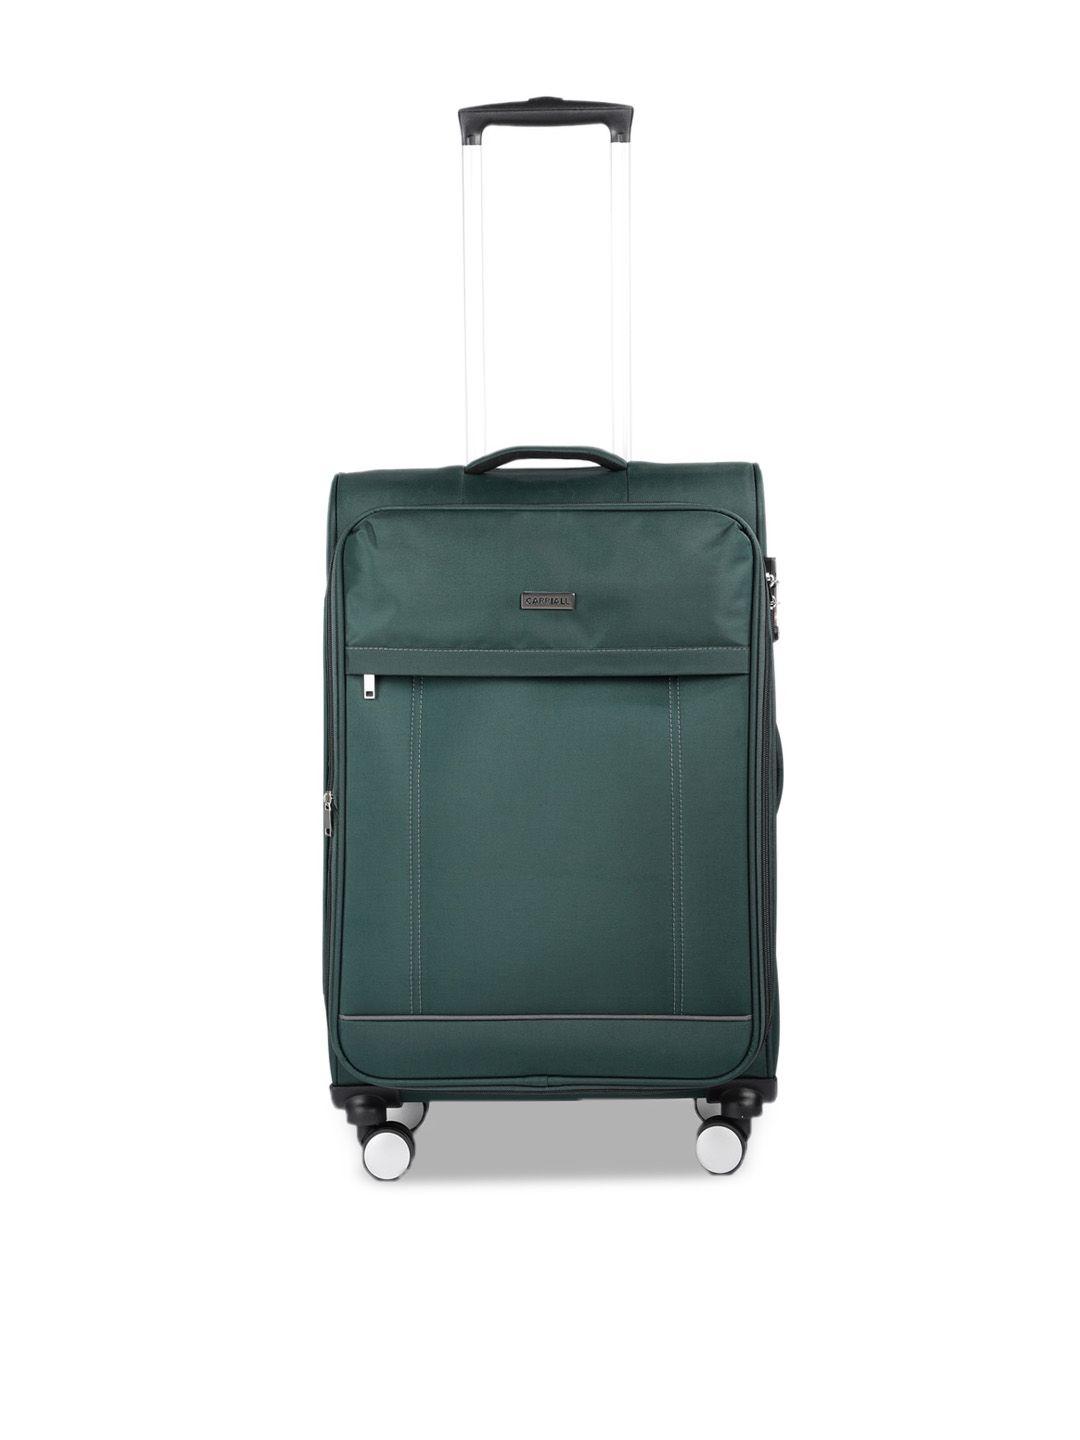 carriall eternal medium size 360 degree rotation check-in luggage